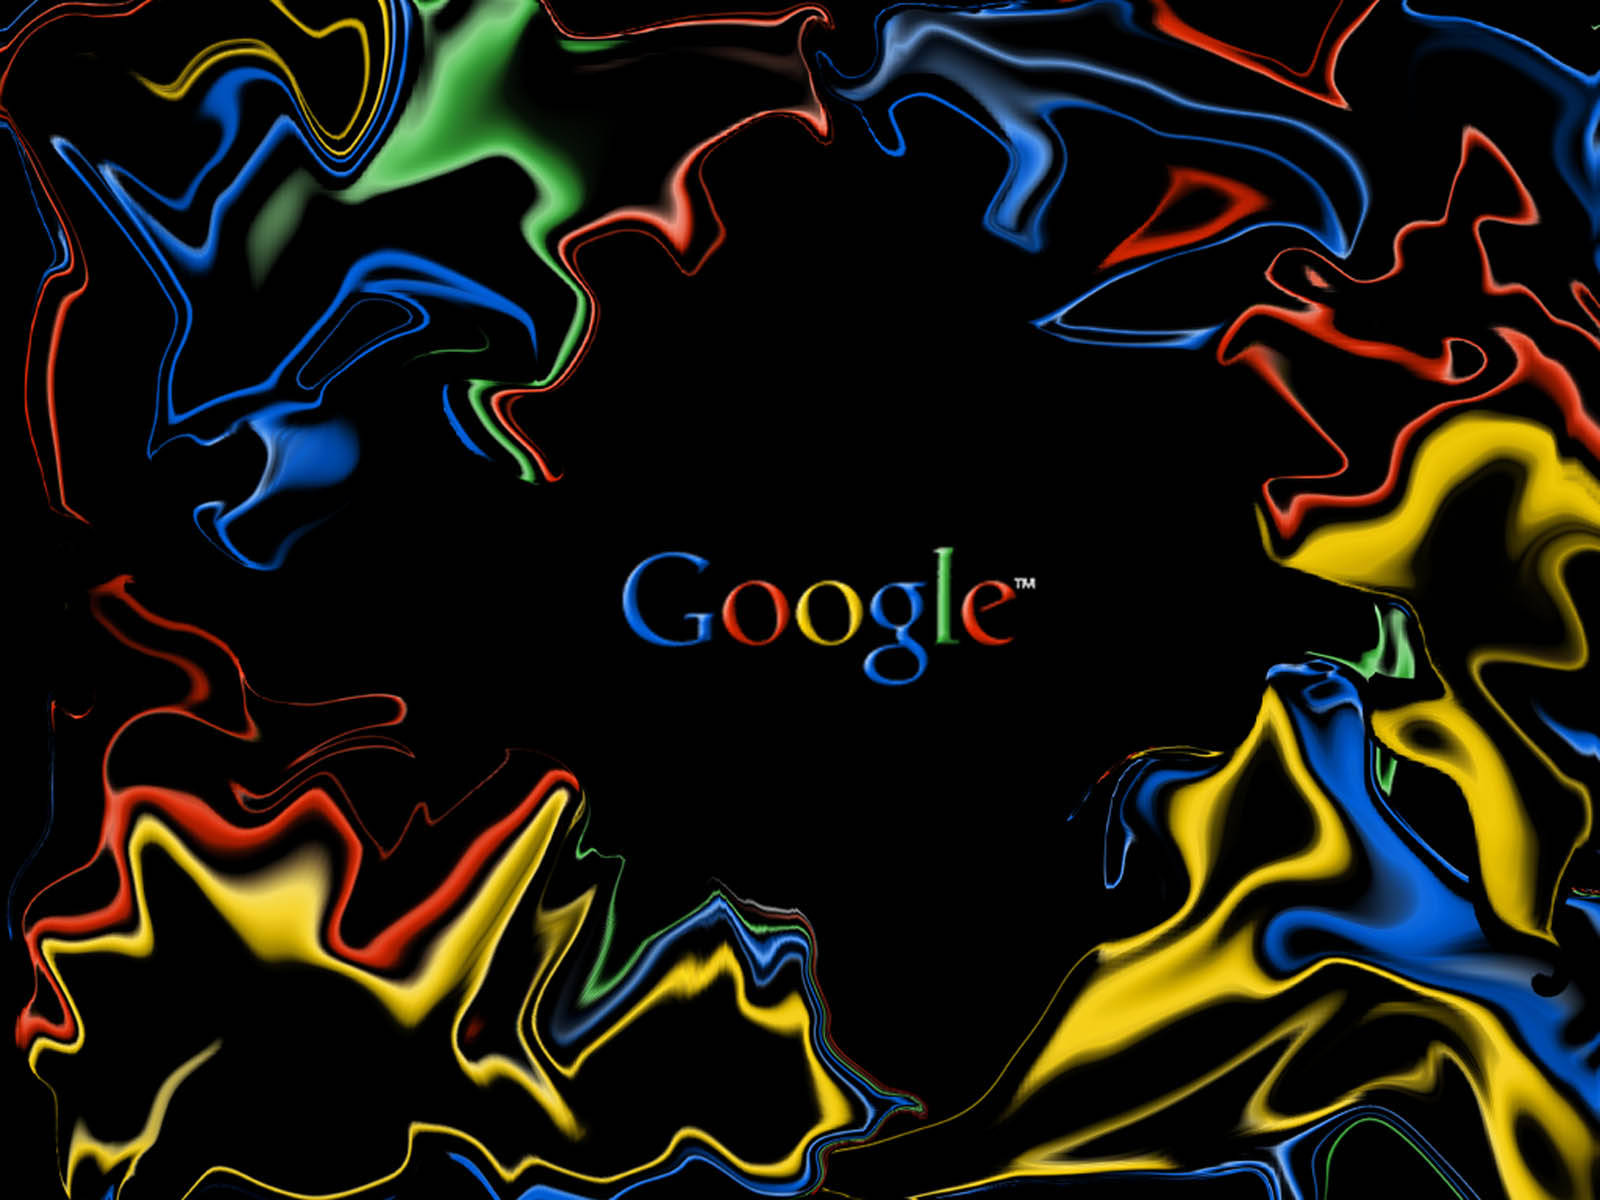 Google Colorful Waves Background